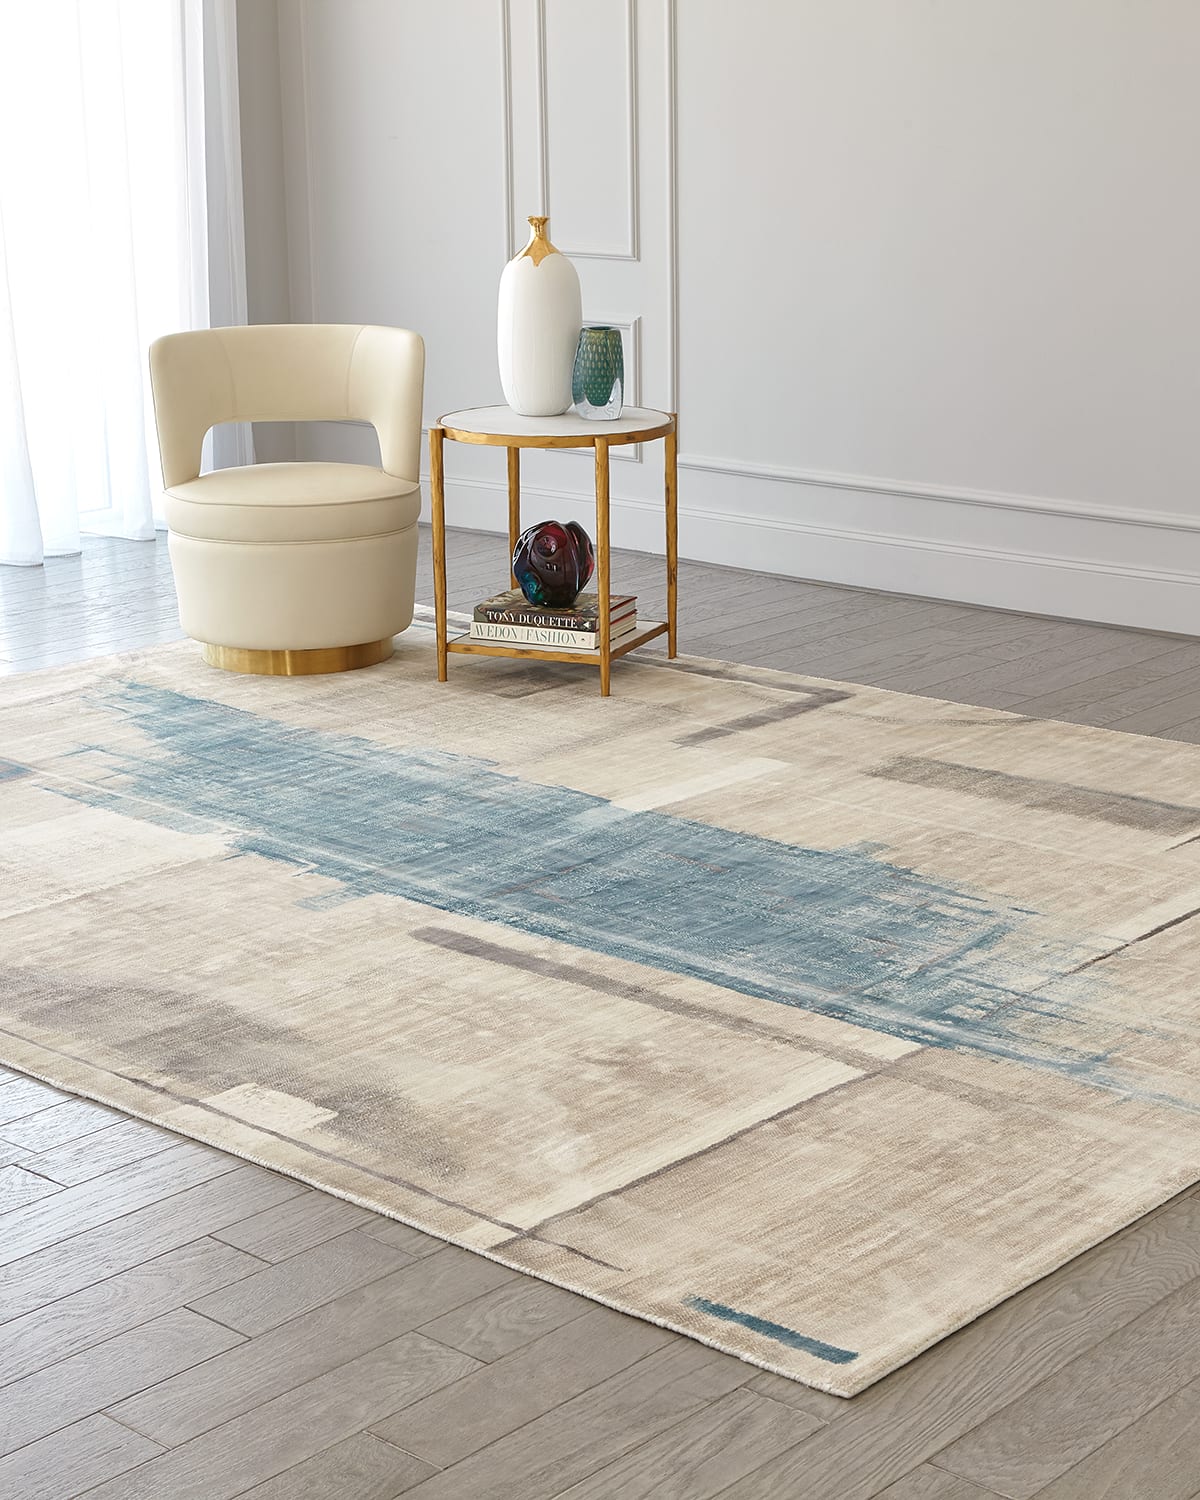 George Sellers For Global Views Art Hand-woven Rug, 5' X 8' In Blue